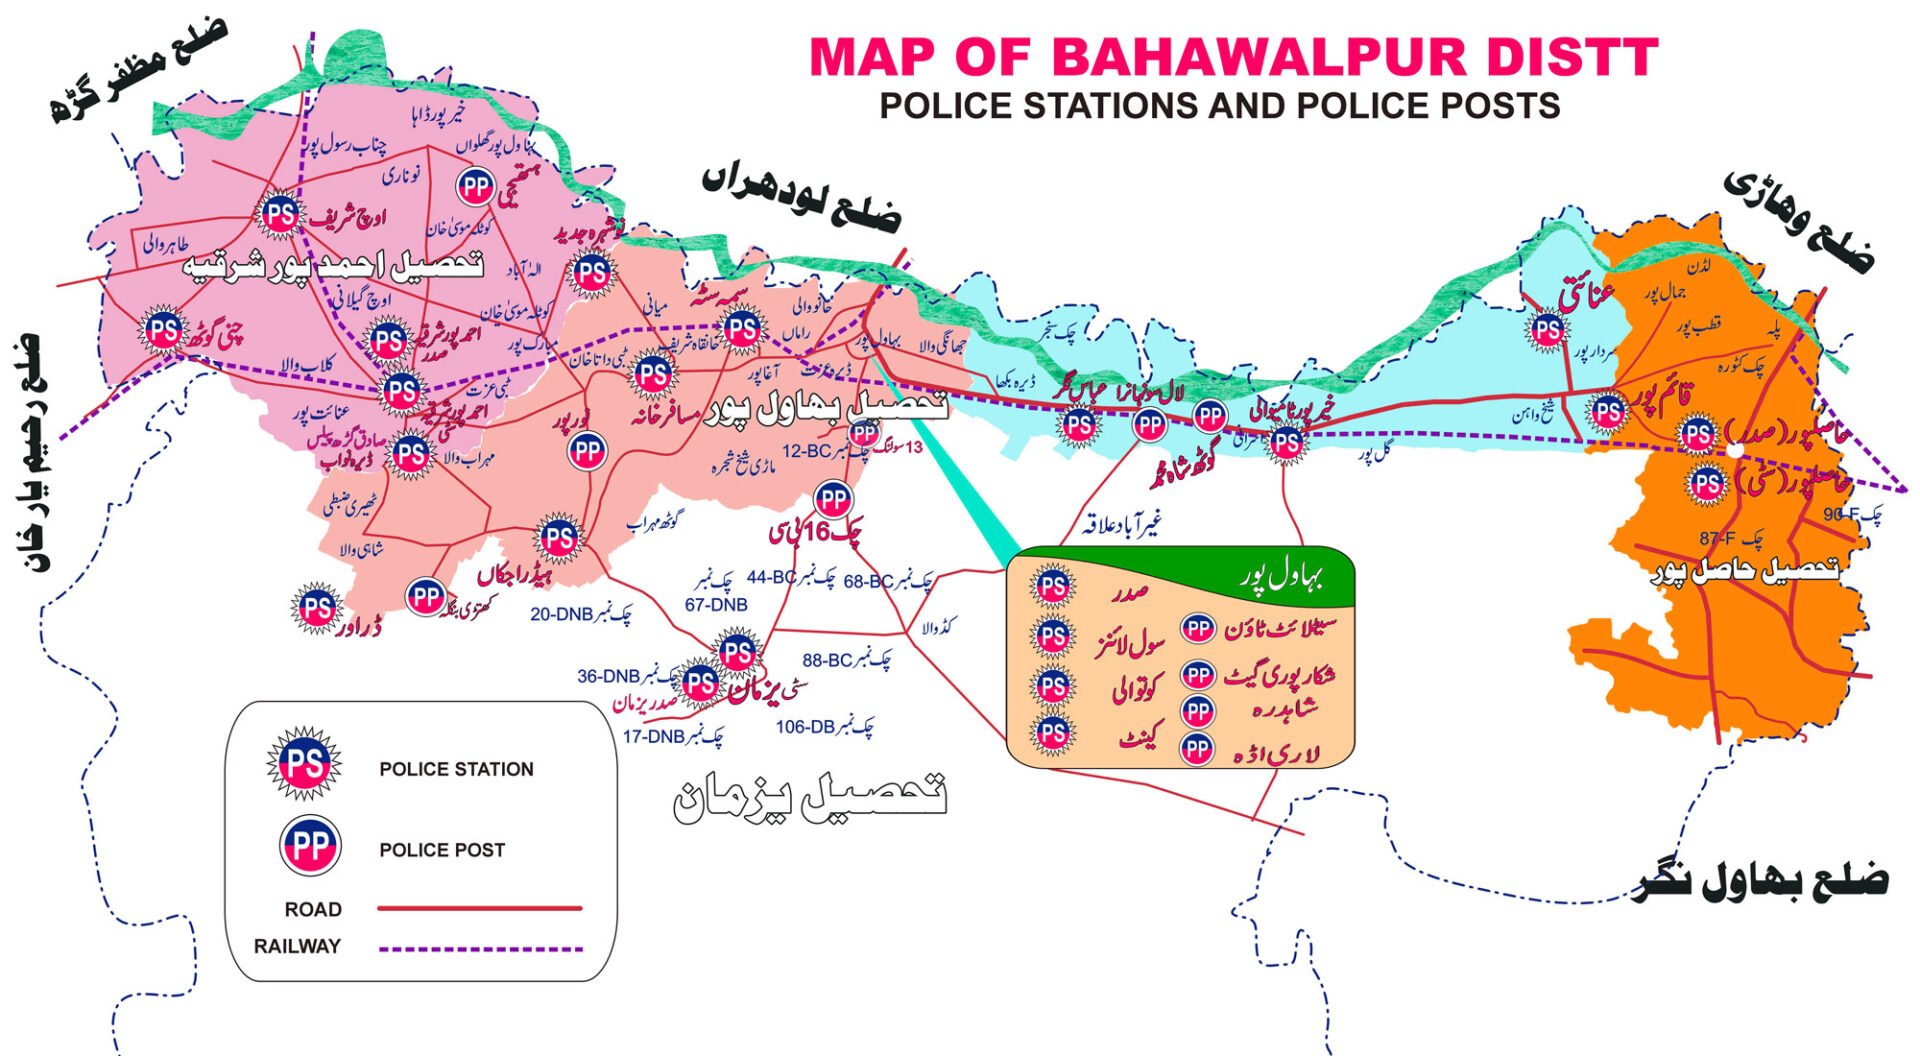 Police Stations in District Bahawalpur